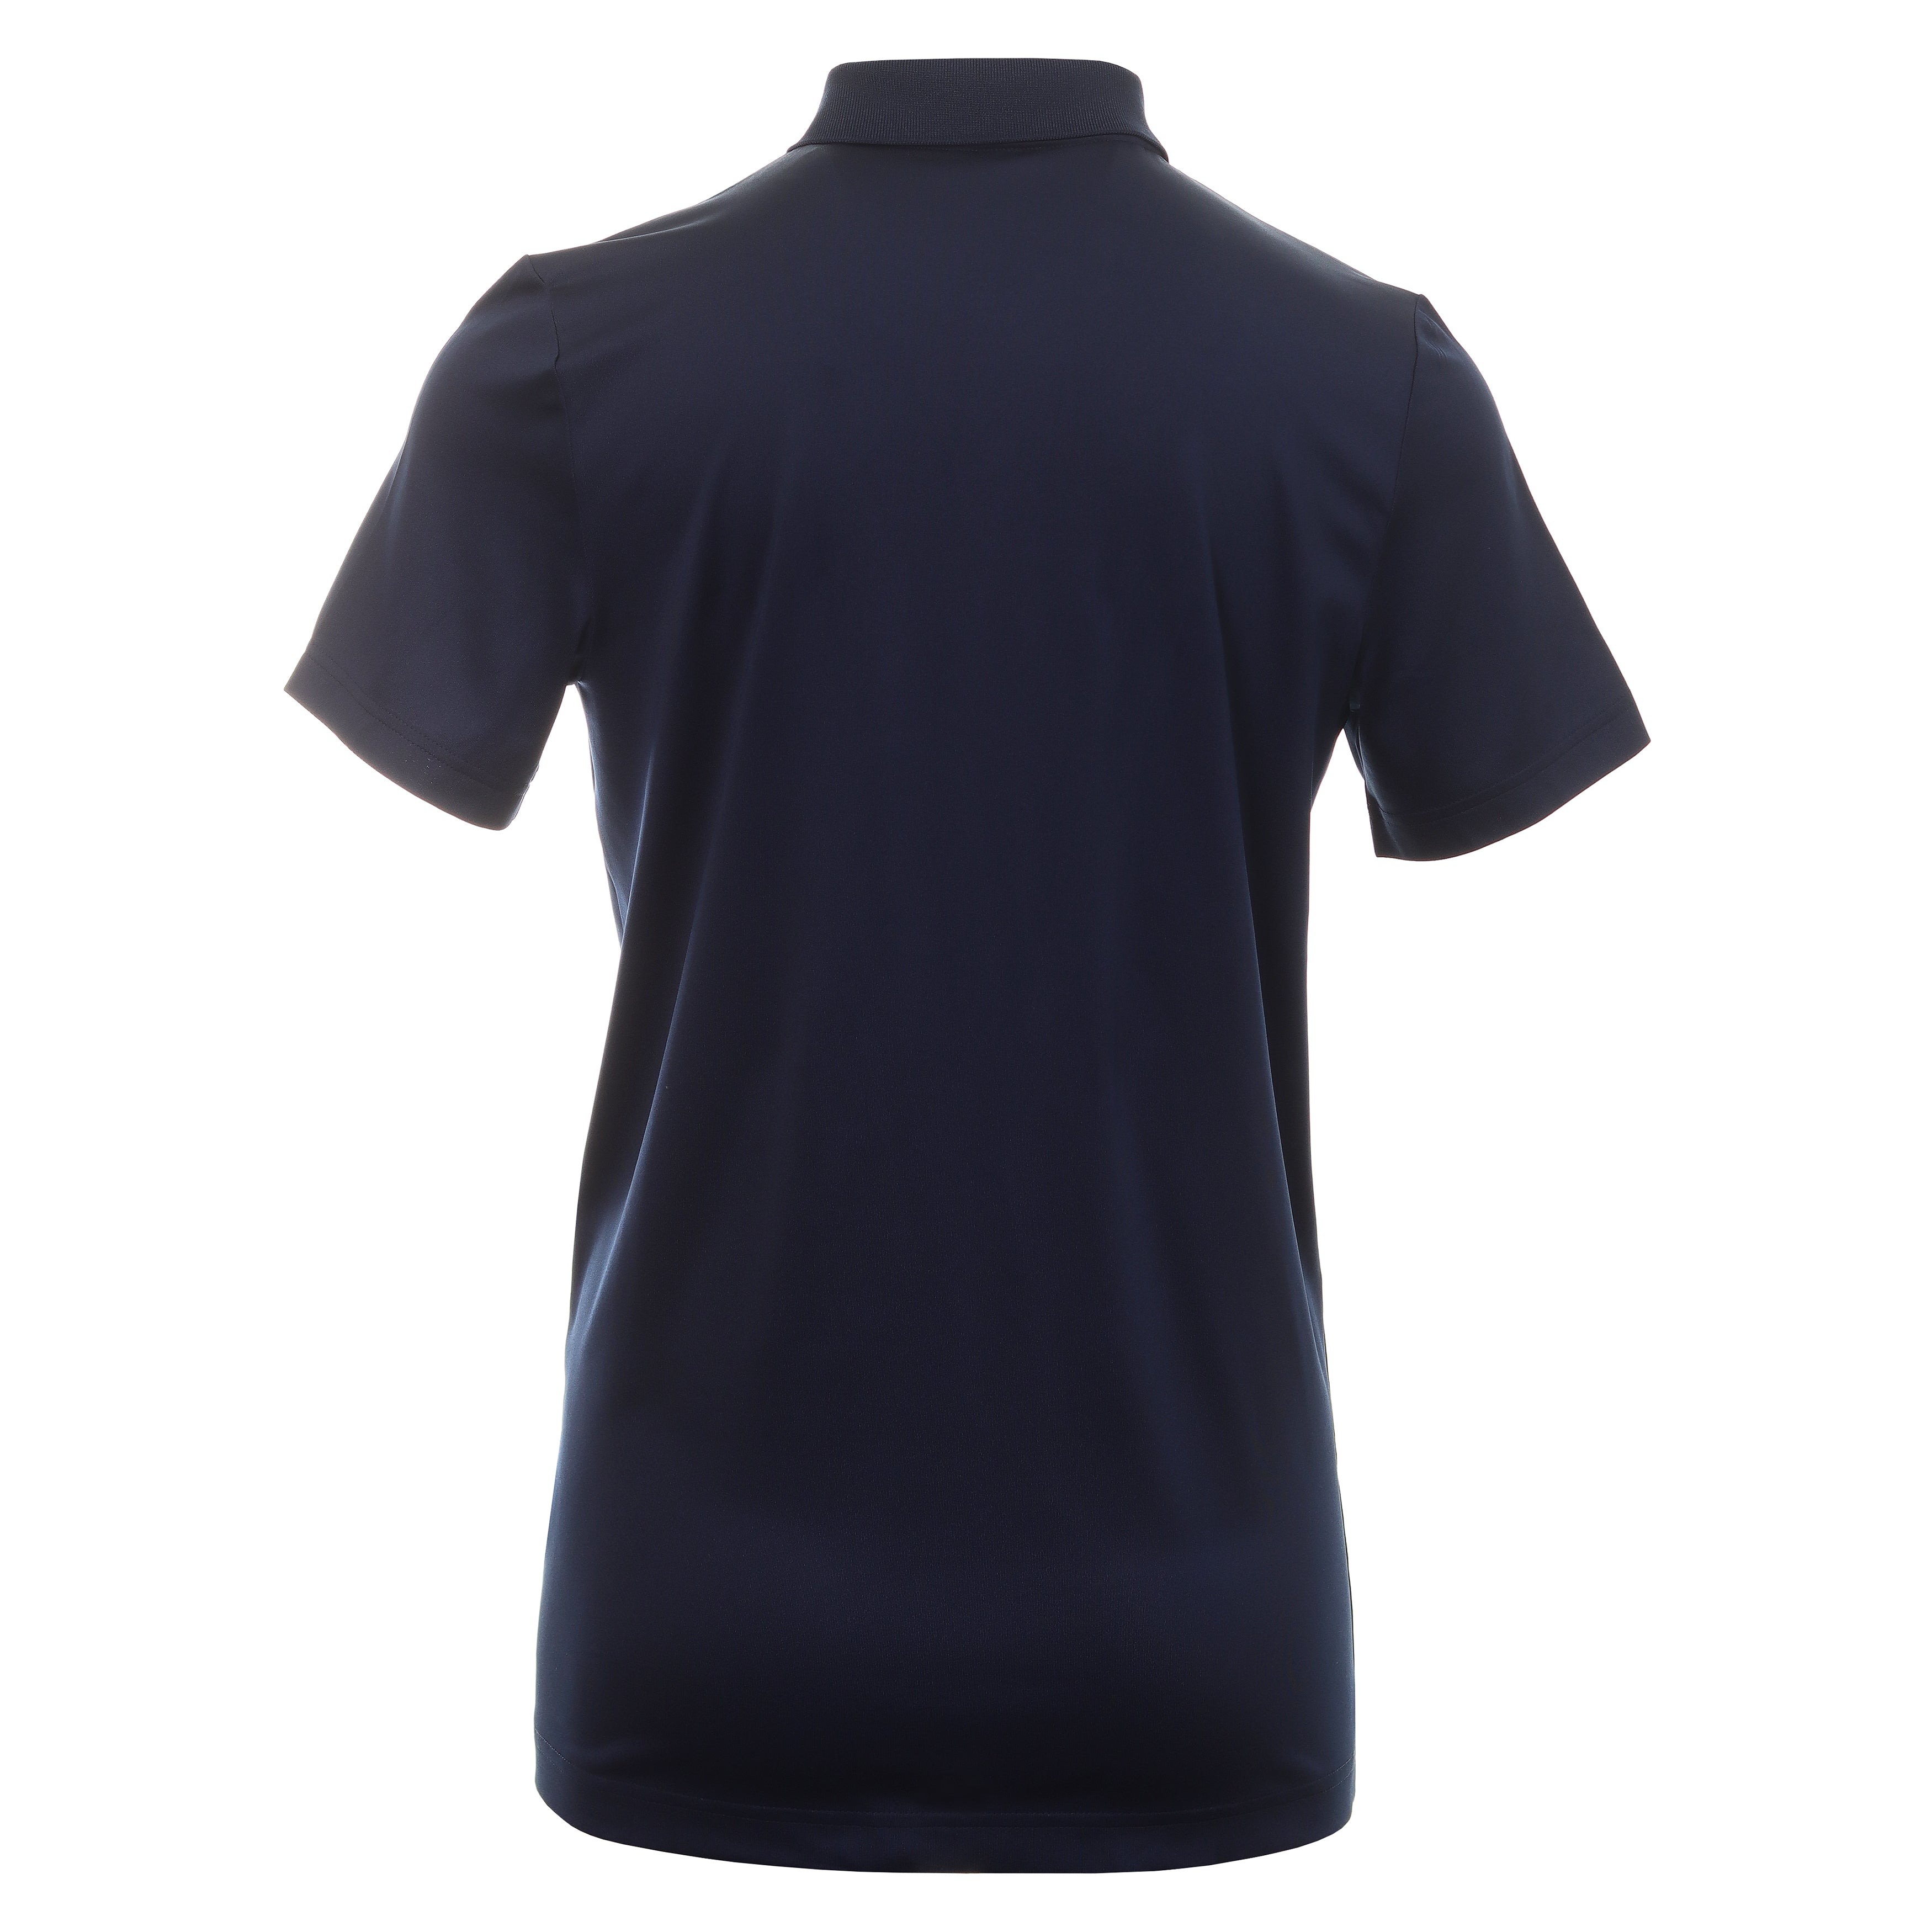 Lacoste Golf Essentials Polo Shirt DH3982 Navy 525 & Function18